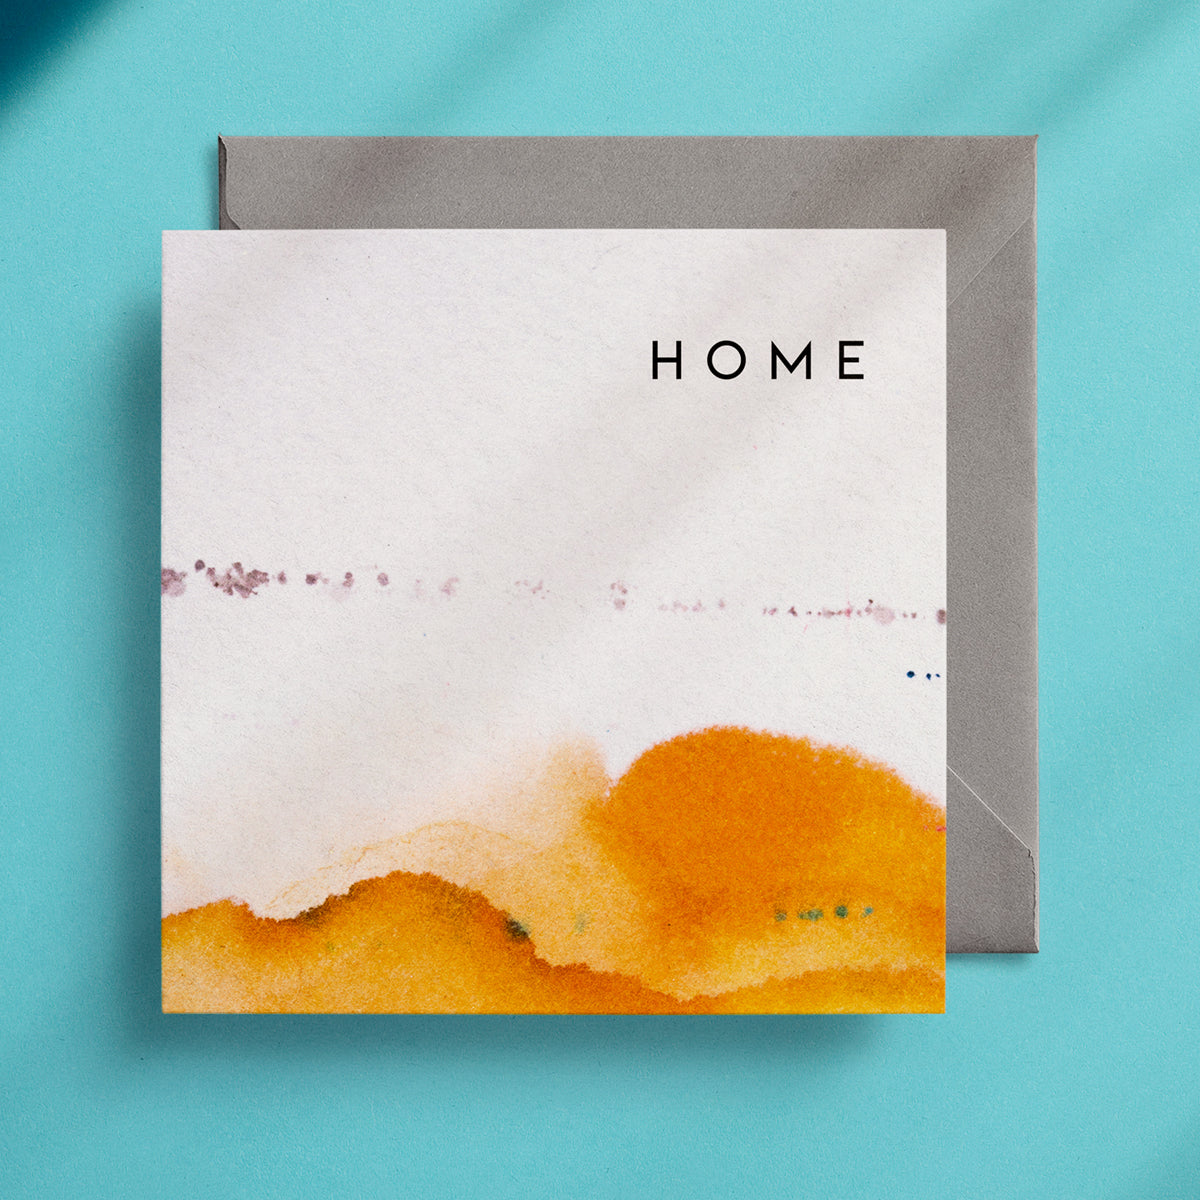 Home - ABSTRACT Greeting Card